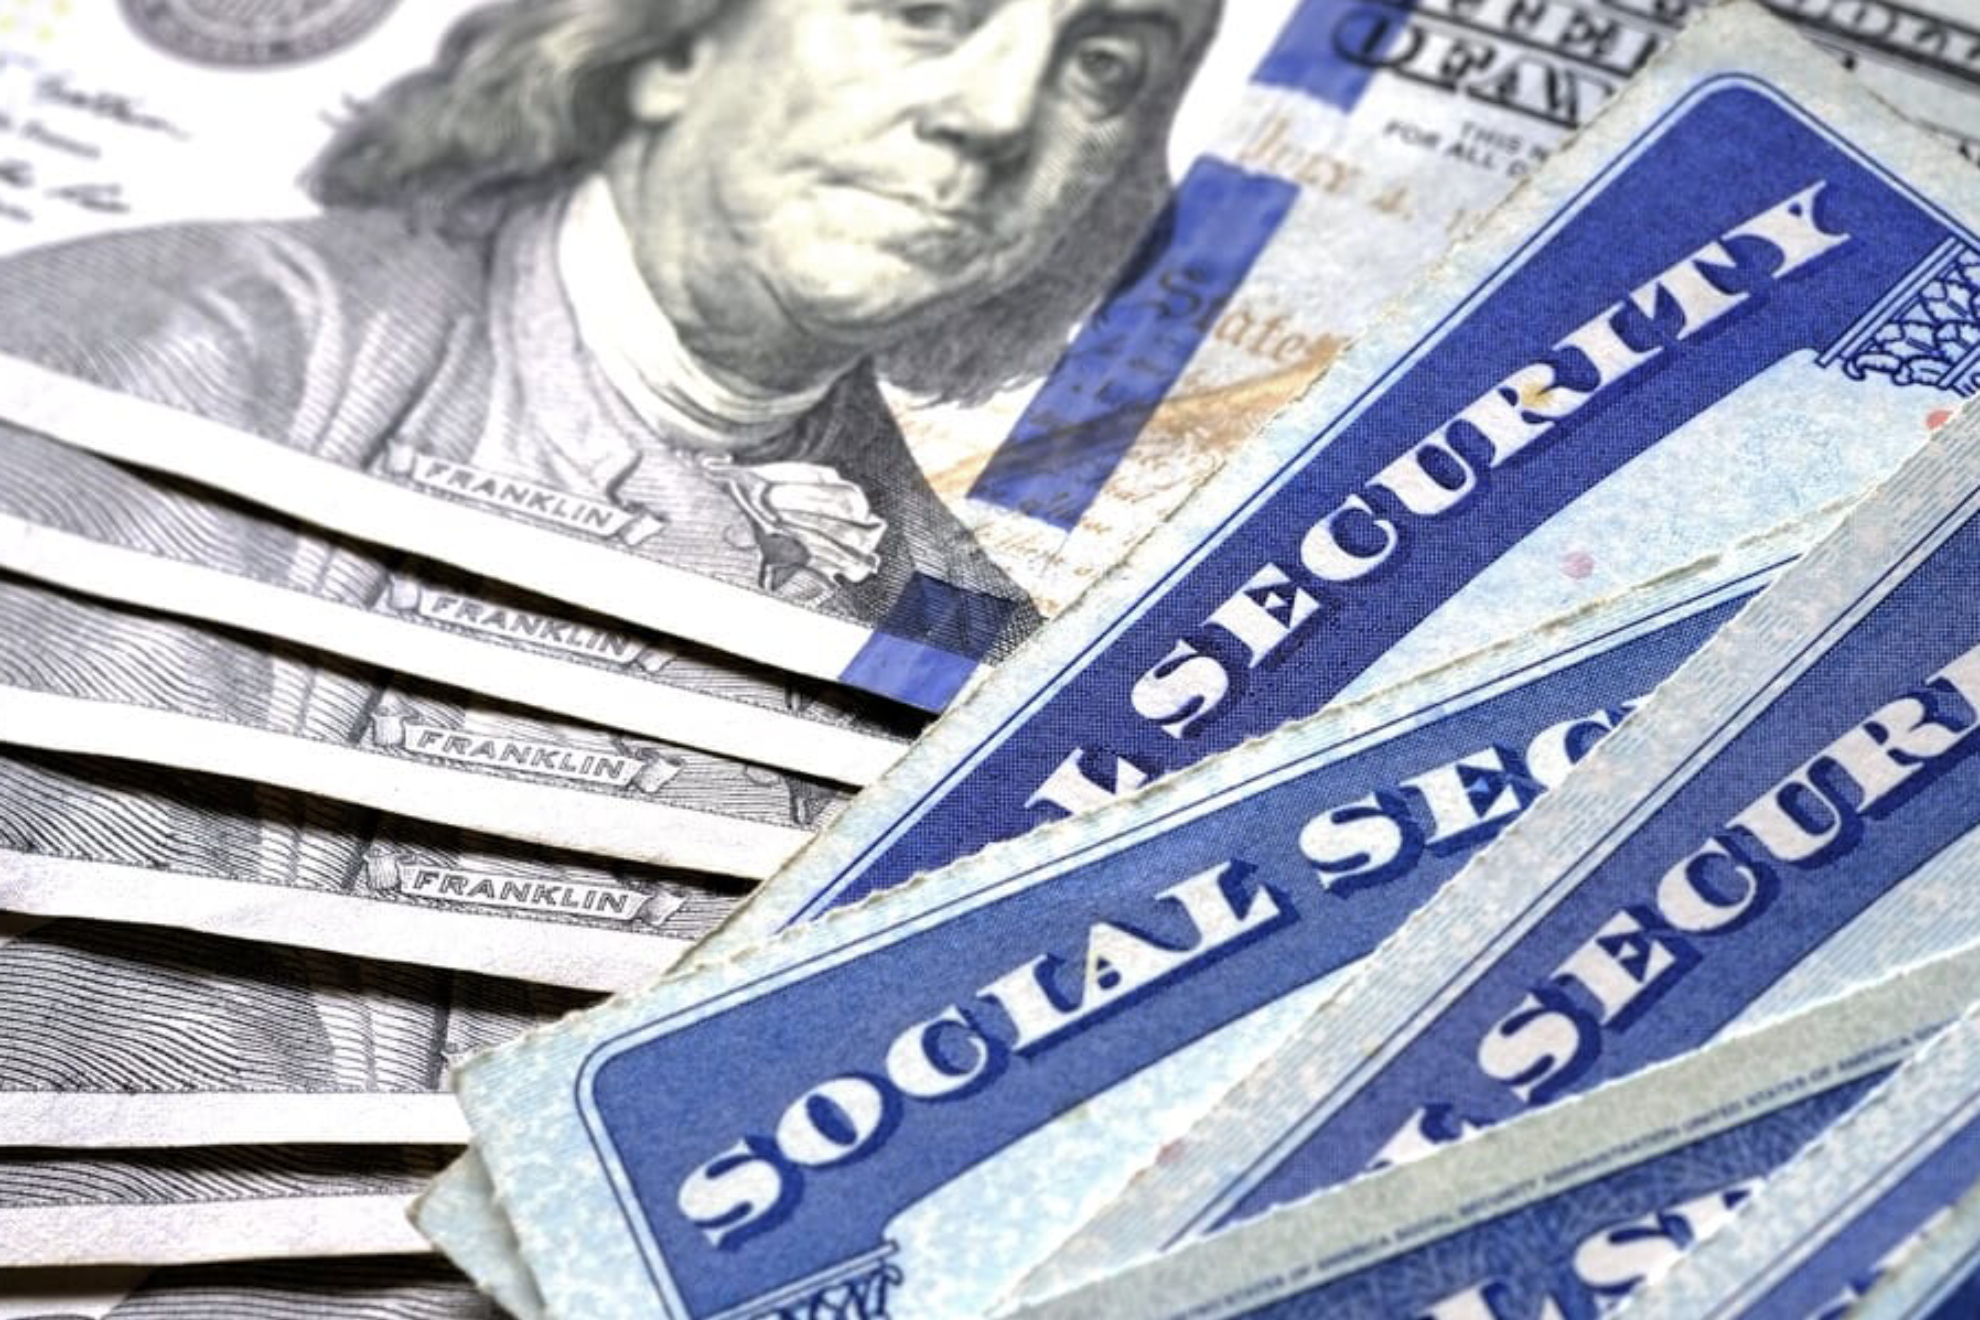 Social Security Disability Insurance: How much work do I need to do to qualify for SSDI benefits?